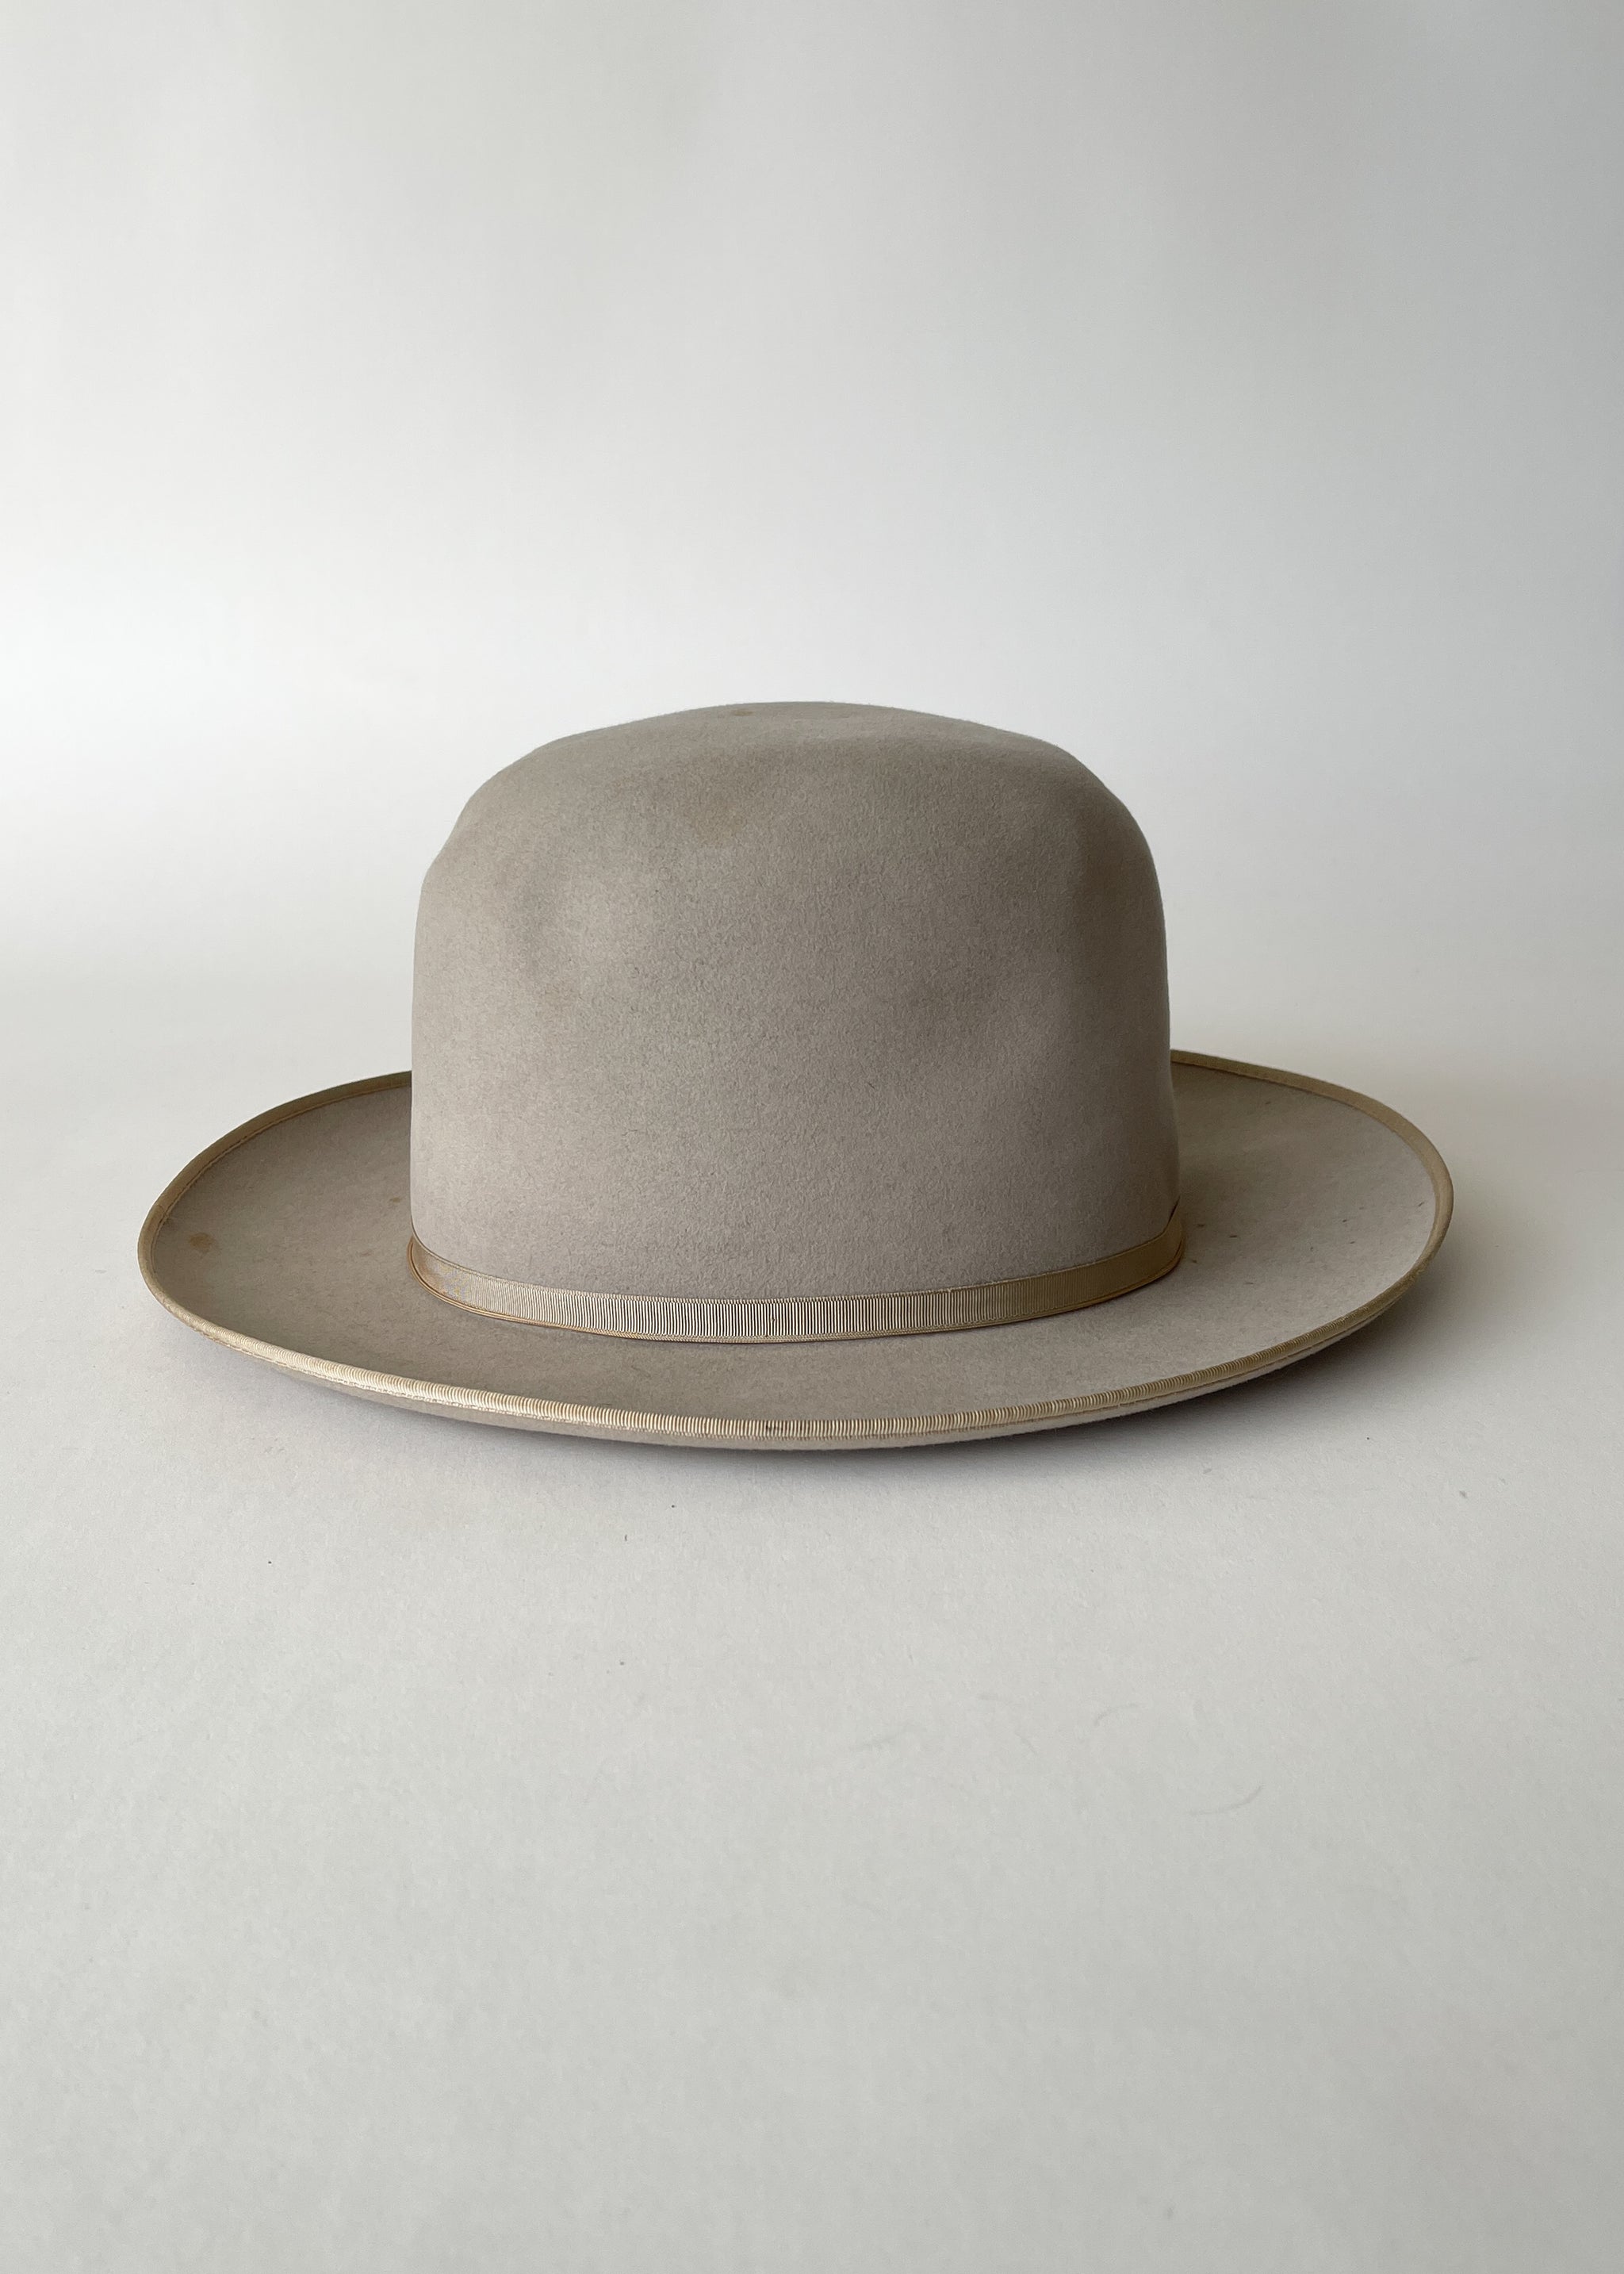 Vintage 1950s Stetson Open Road Fedora Hat - Raleigh Vintage